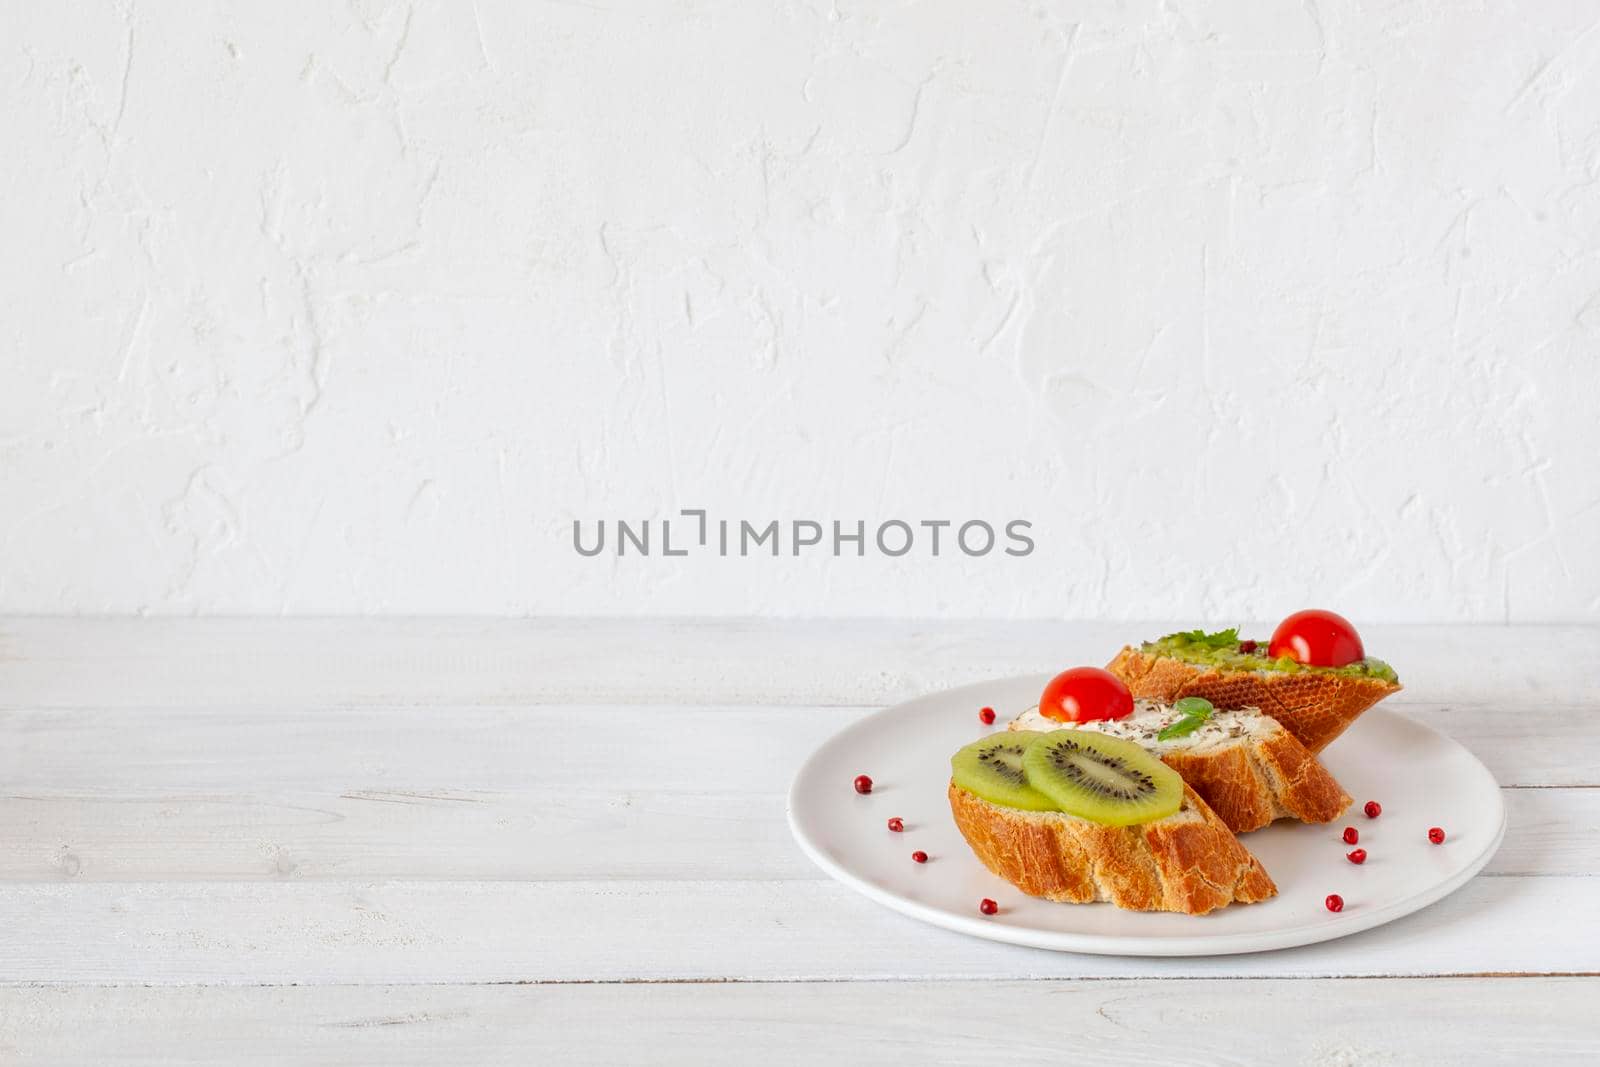 three homemade bright mini sandwichs with cream cheese and vegetables, on a white plate on wooden background, side view, copy space